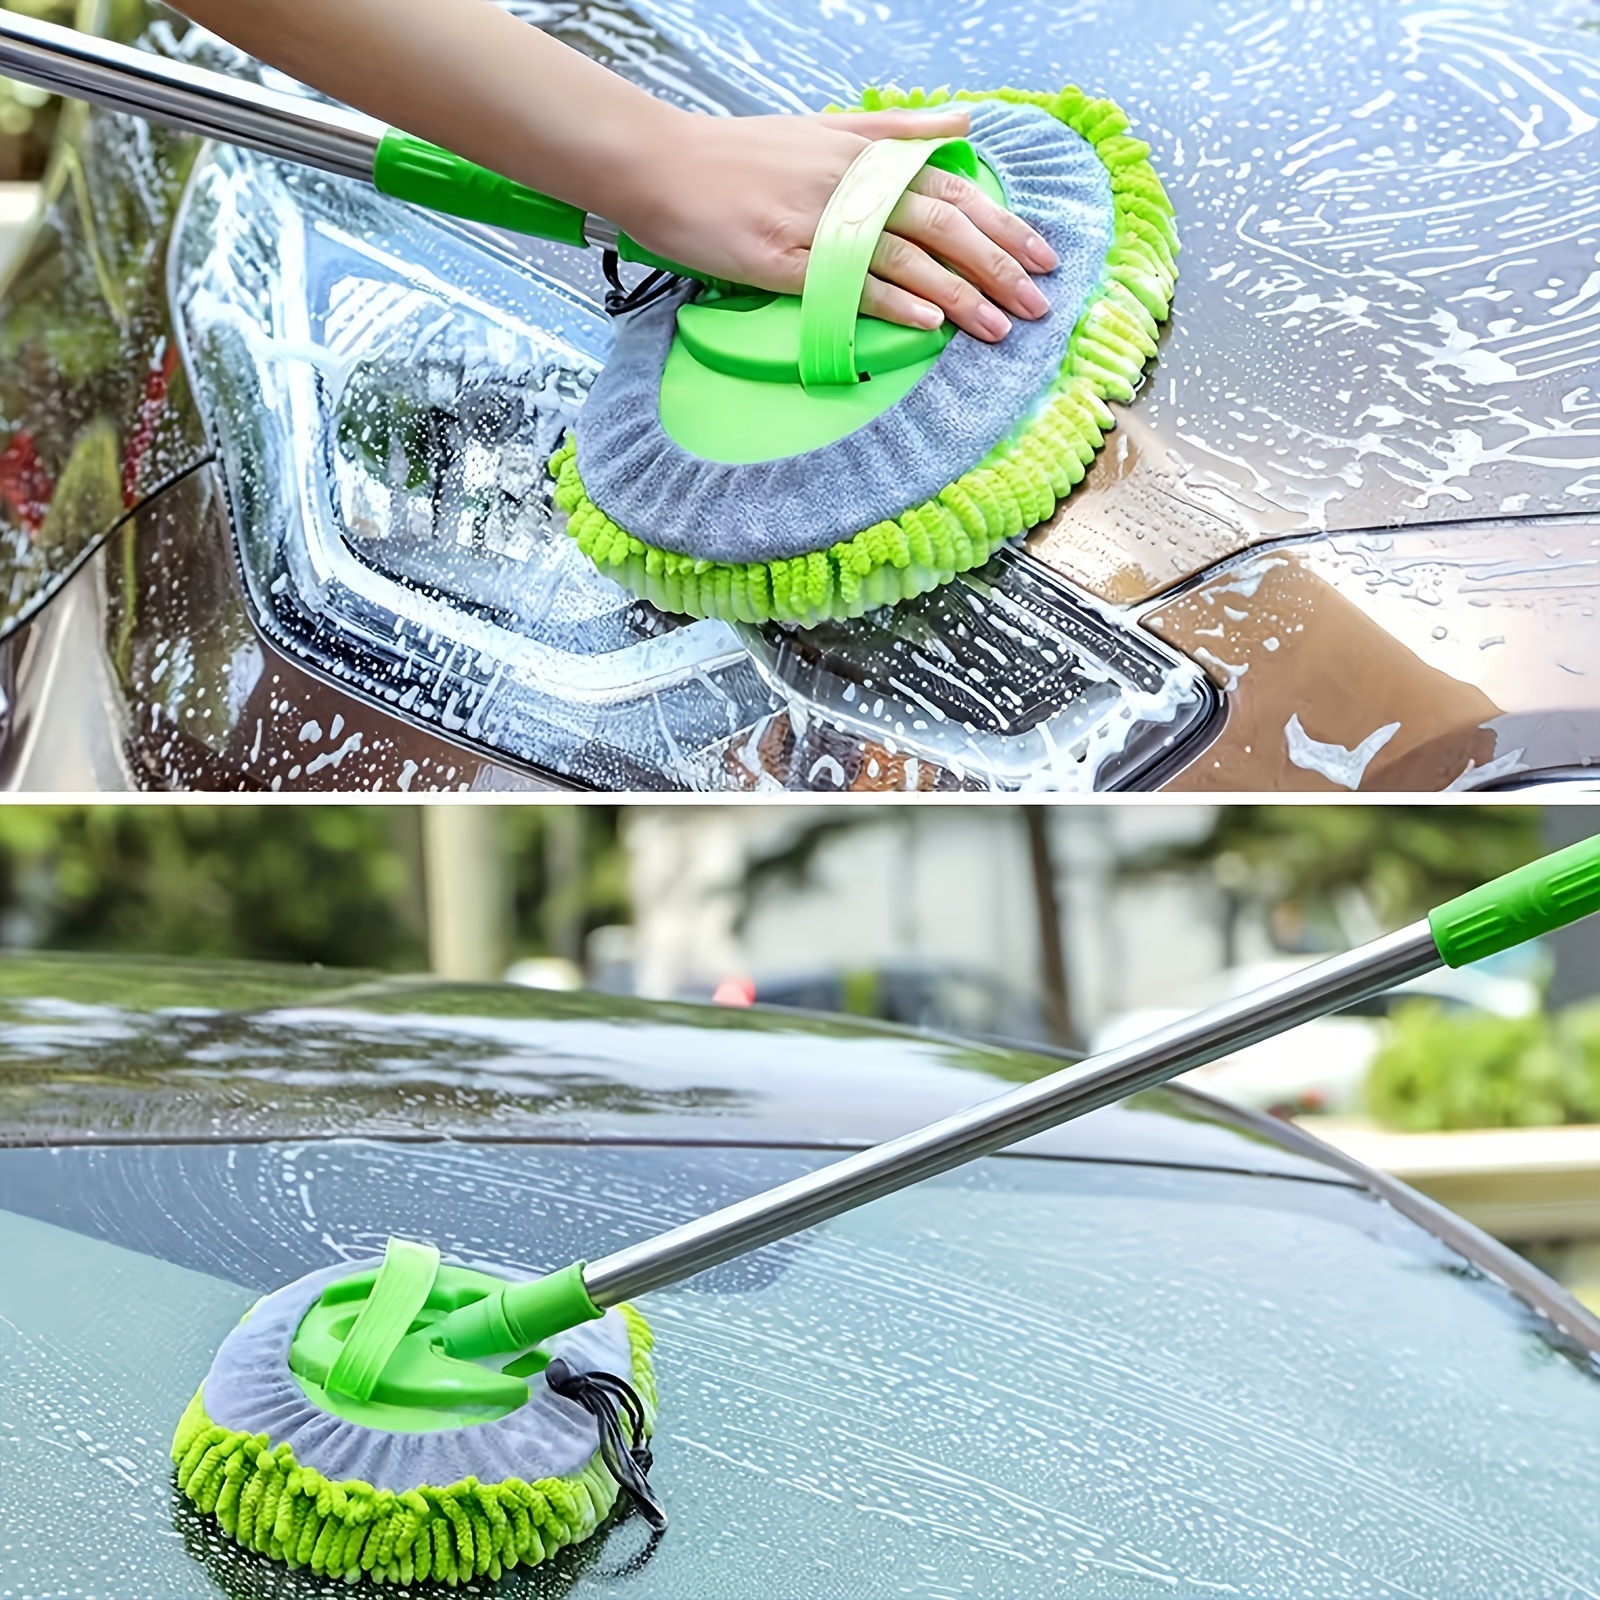 Car Wash Cleaning Kit